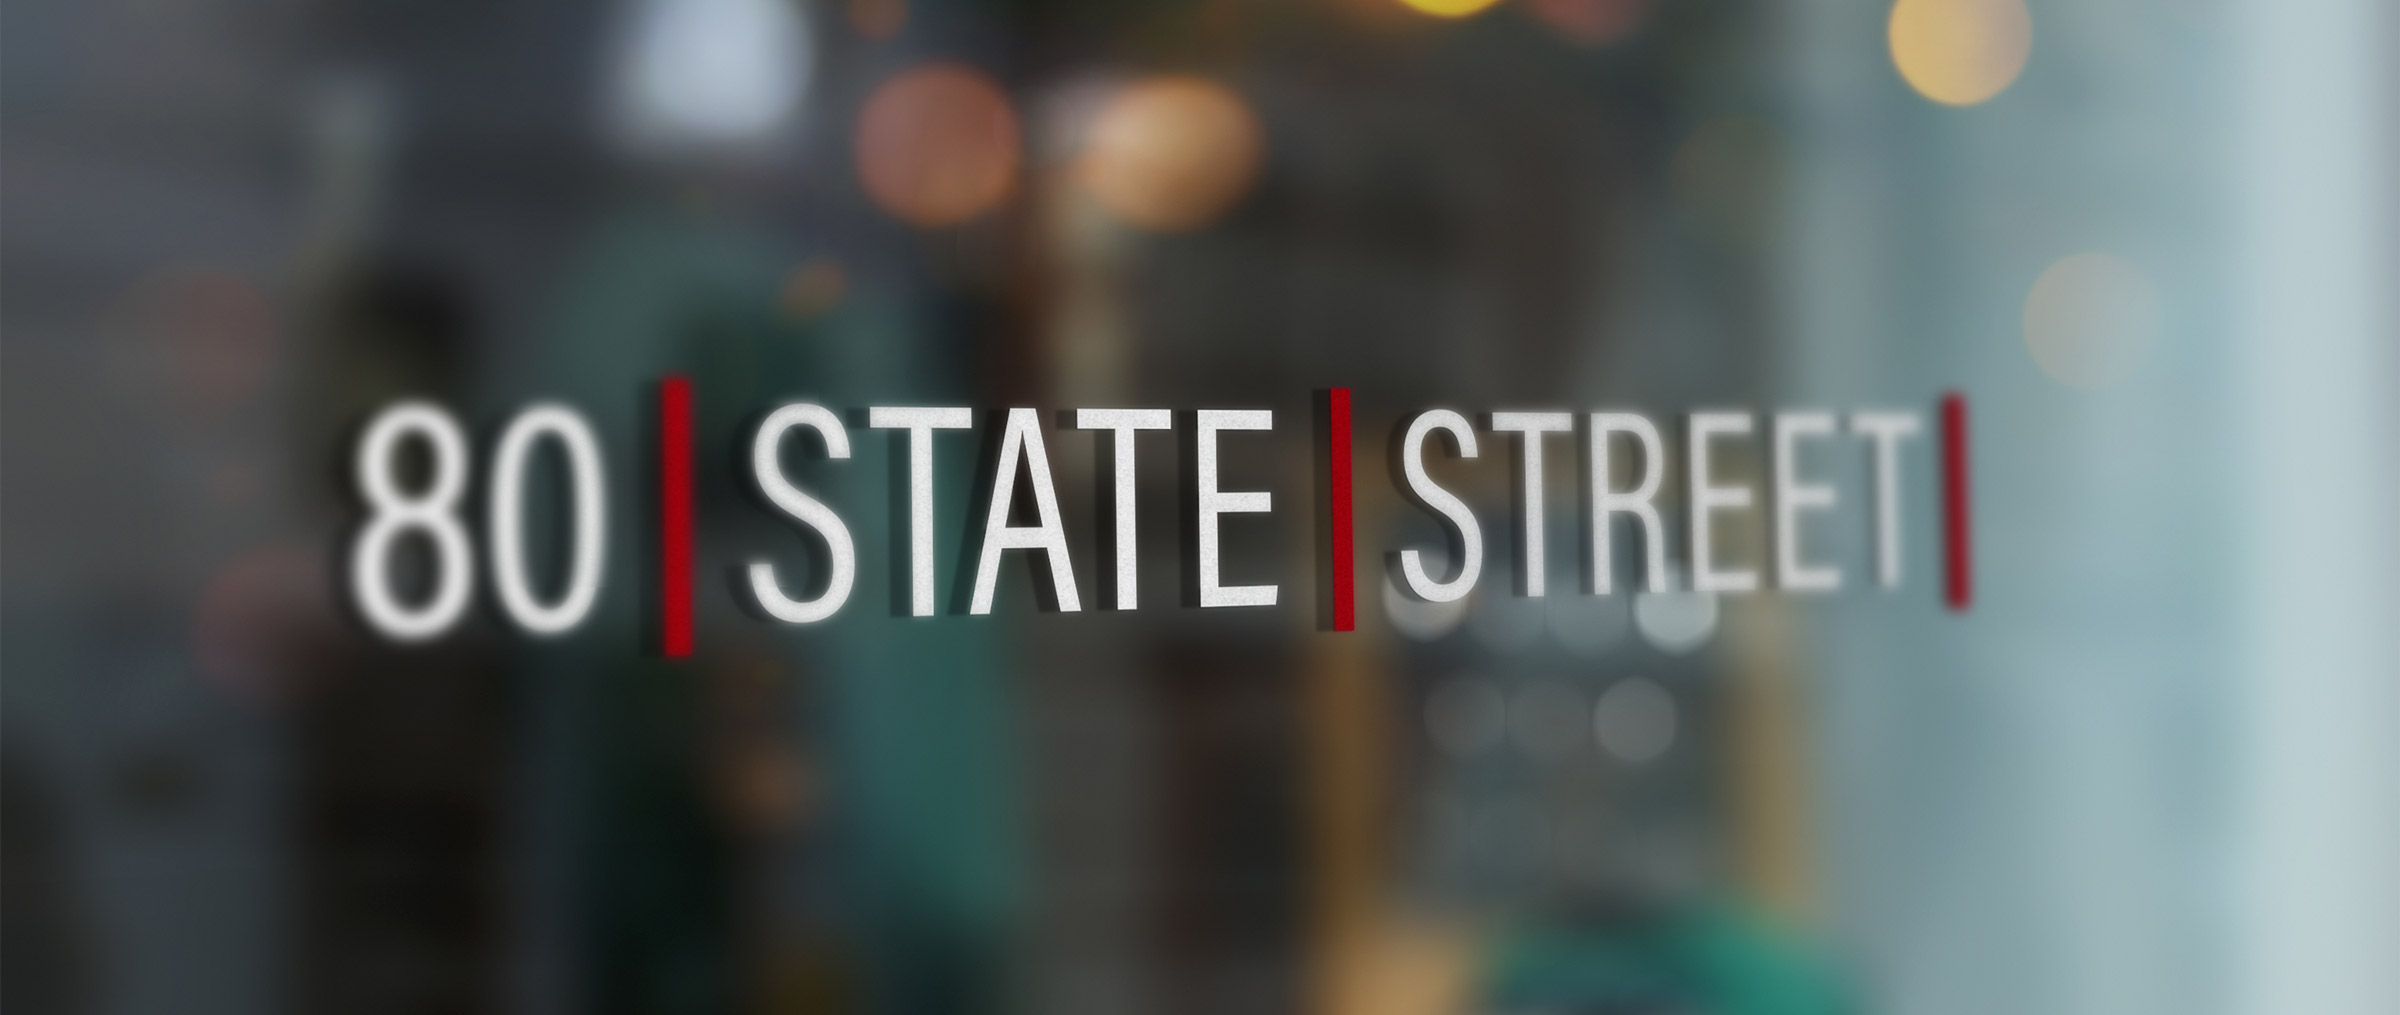 80 state street sign